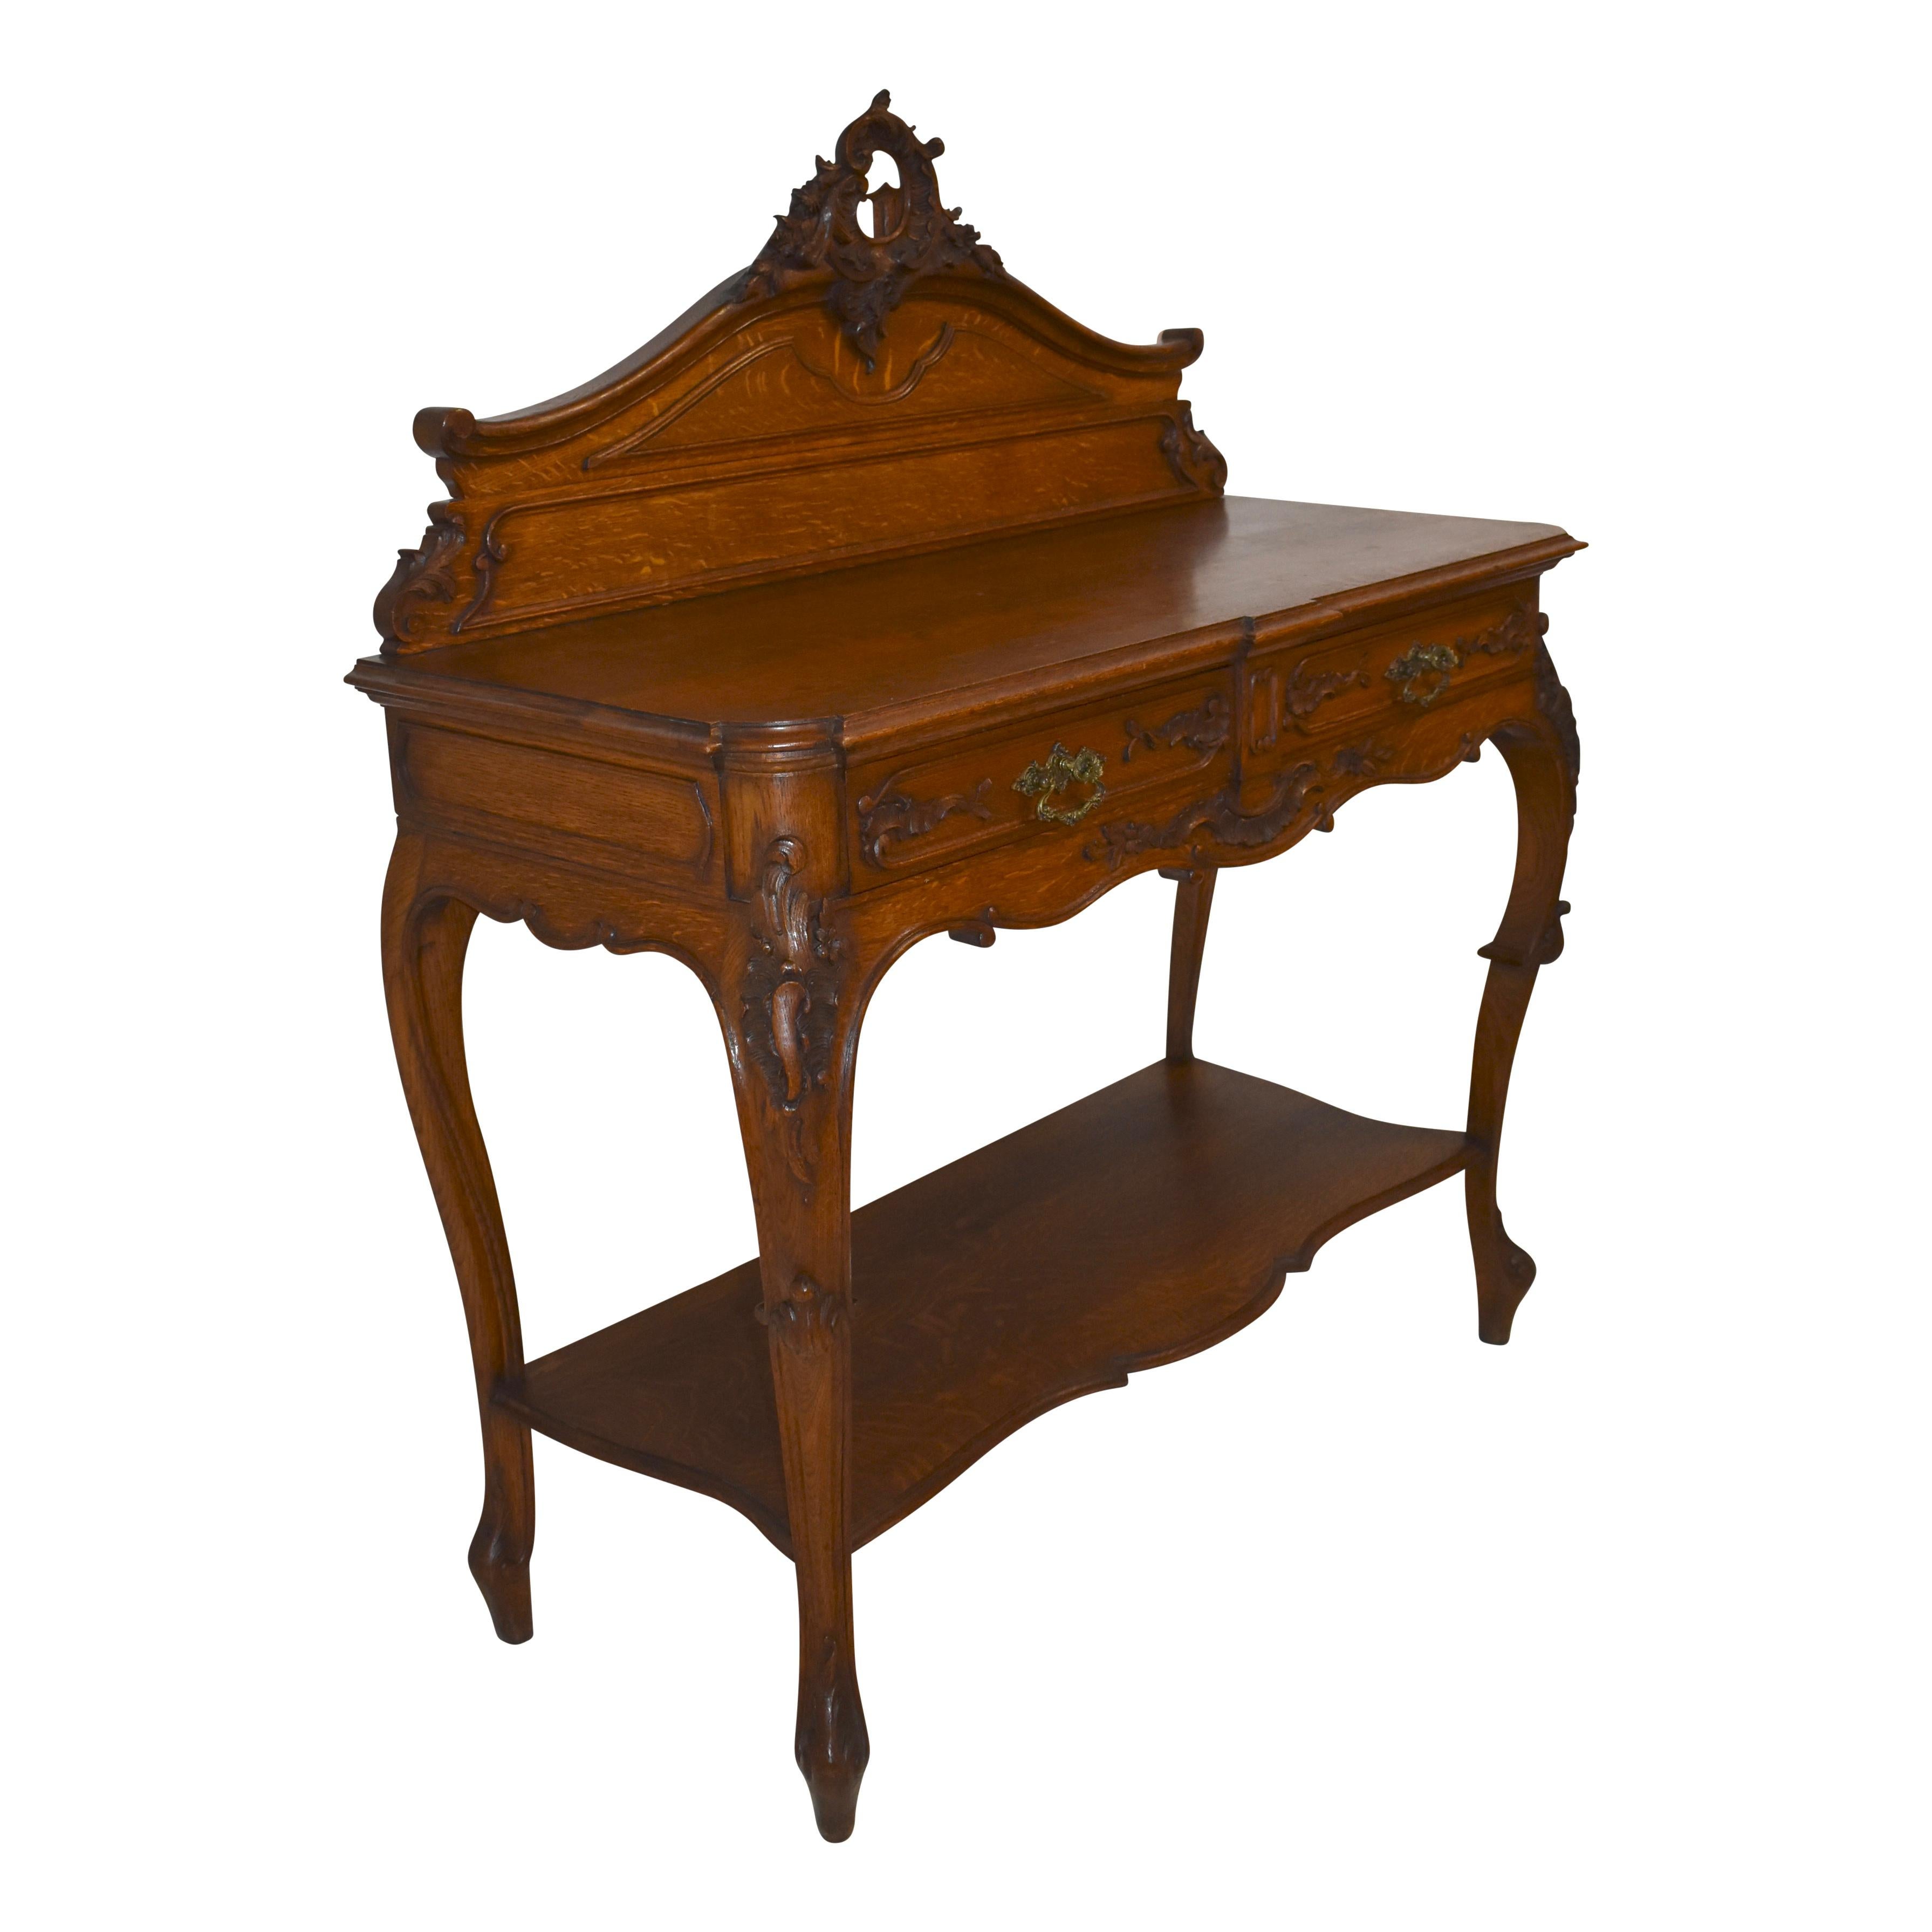 Beautifully carved from oak and quarter-sawn oak, this elegant dessert buffet features a pierced backboard carved of c scrolls, ruffles, flowers and foliage. Two dovetailed, carved drawers open to storage beneath the beveled top tier, which is 39.5